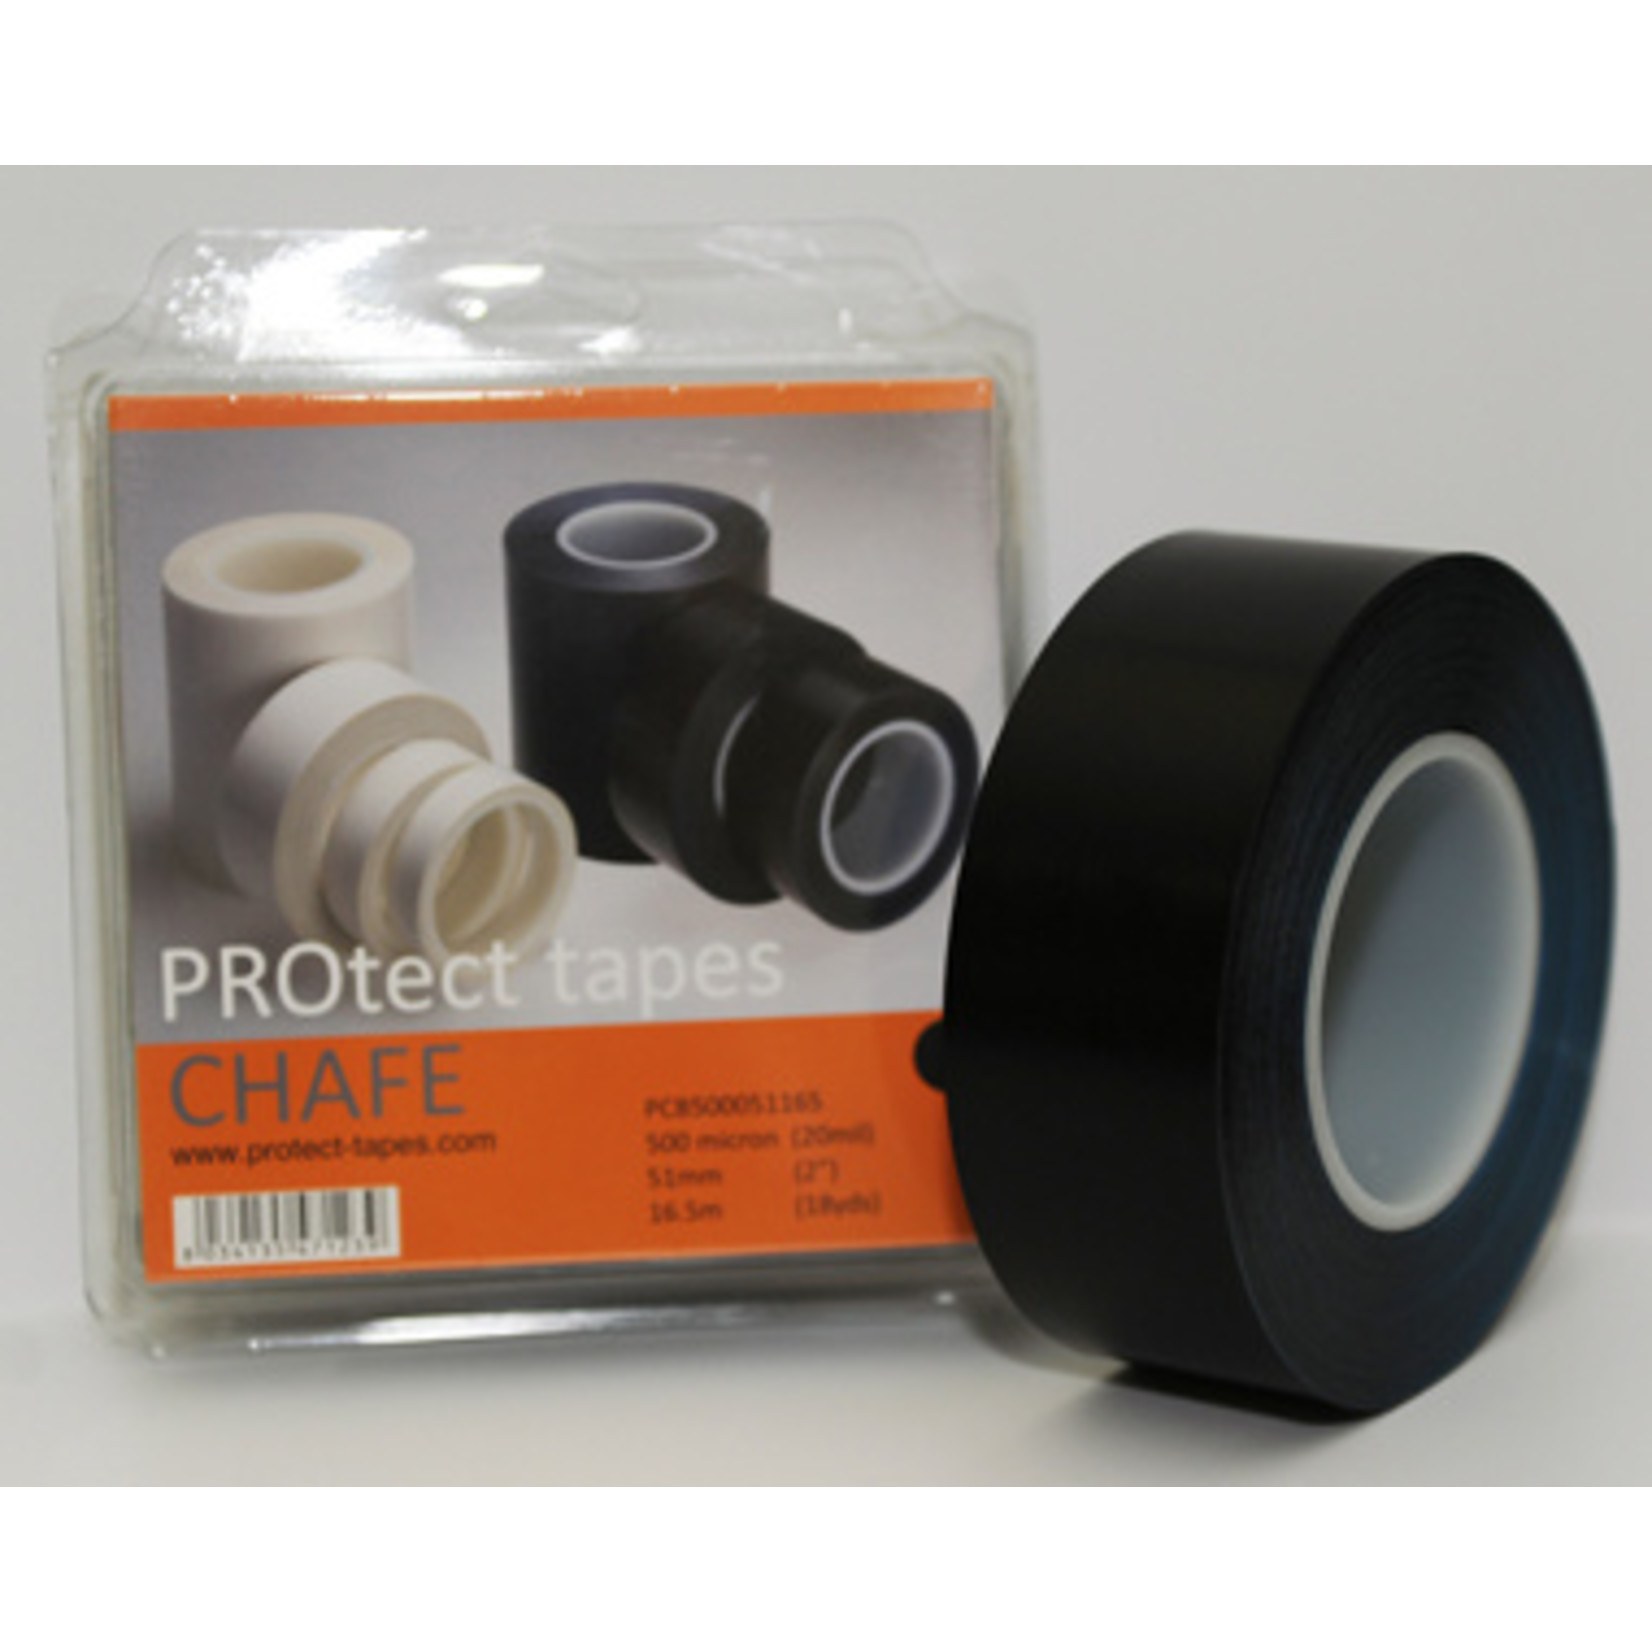 PROtect Tapes Chafe 500mic. black 51mm x 16.5m